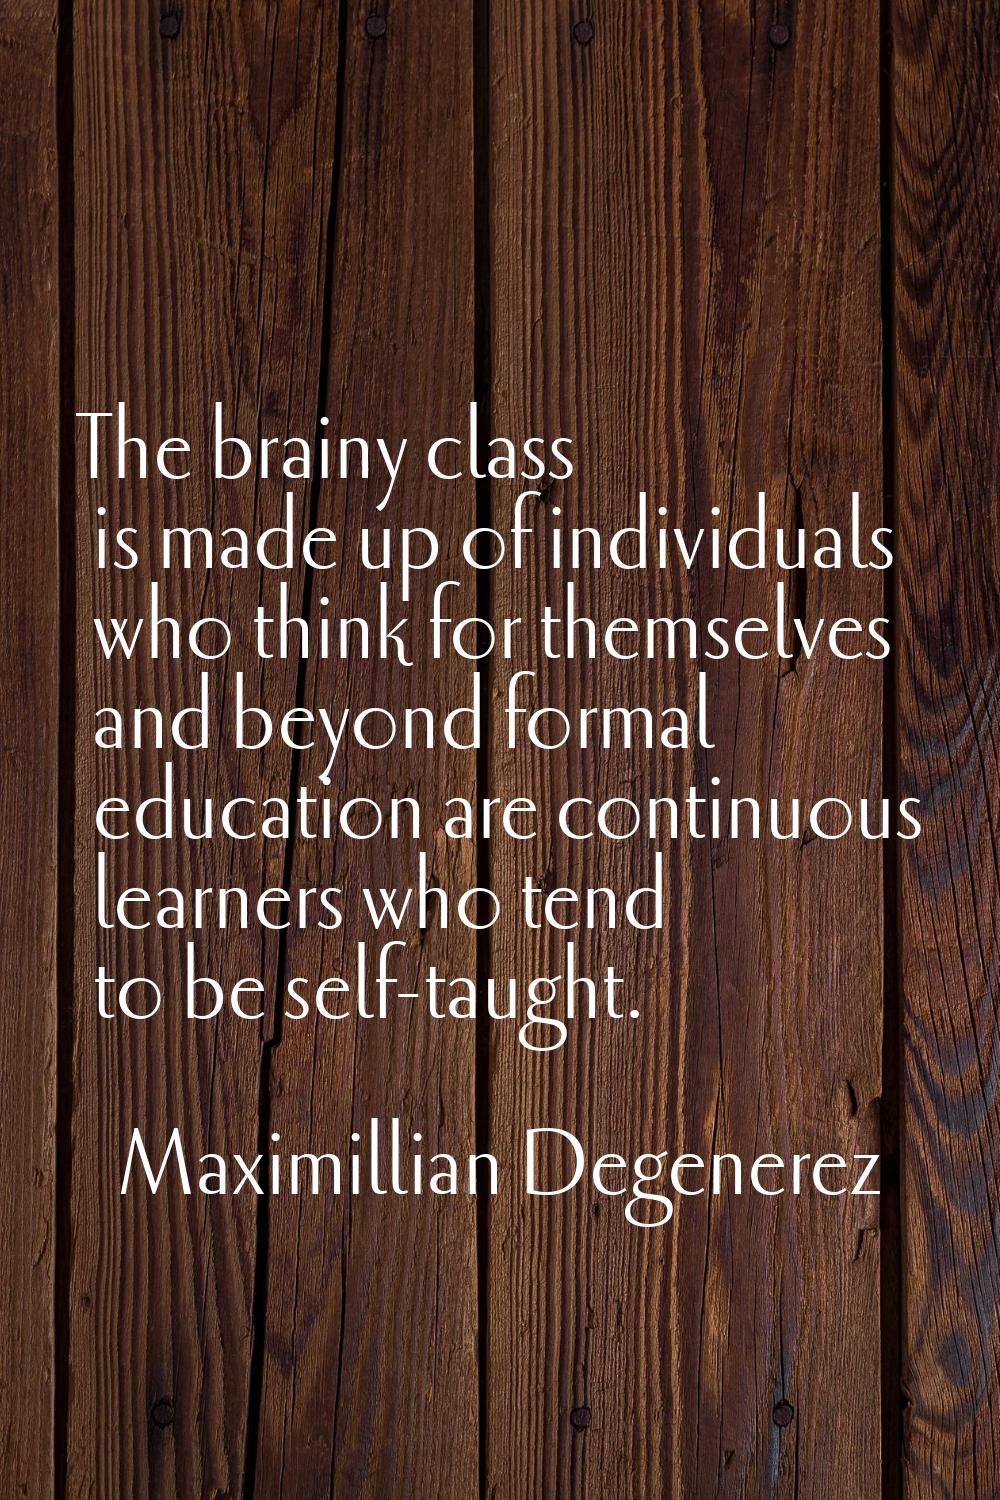 The brainy class is made up of individuals who think for themselves and beyond formal education are